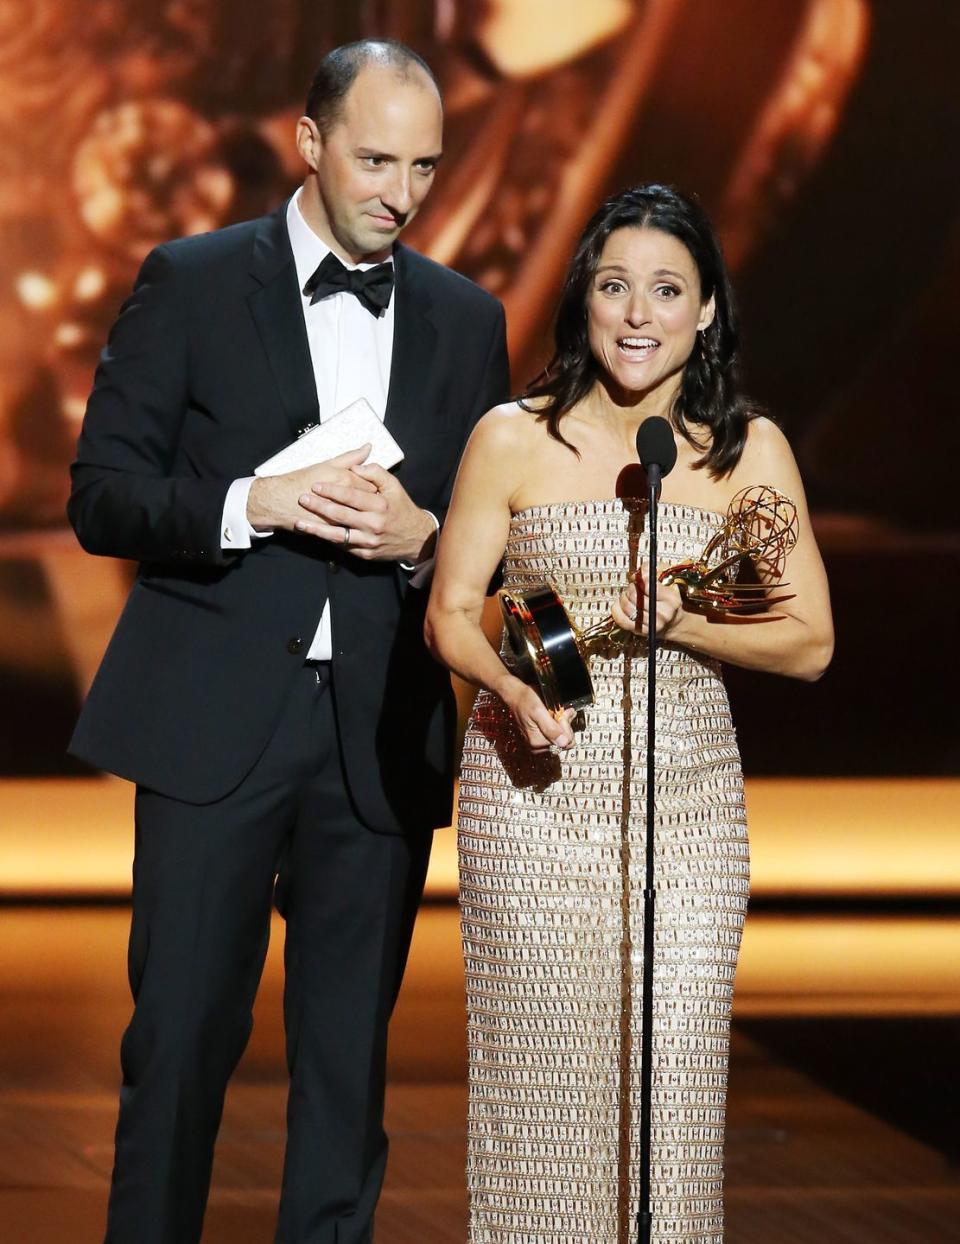 <p>When Julia Louis-Dreyfus won Best Actress in a Comedy for her role in <em>Veep</em>, she walked up to the stage with Tony Hale behind her for a <em>Veep</em> bit that every fan appreciated. Hale stood behind Louis-Dreyfus to remind her to thank her family—and when she didn't thank him as part of the cast, it was the perfect touch. </p>